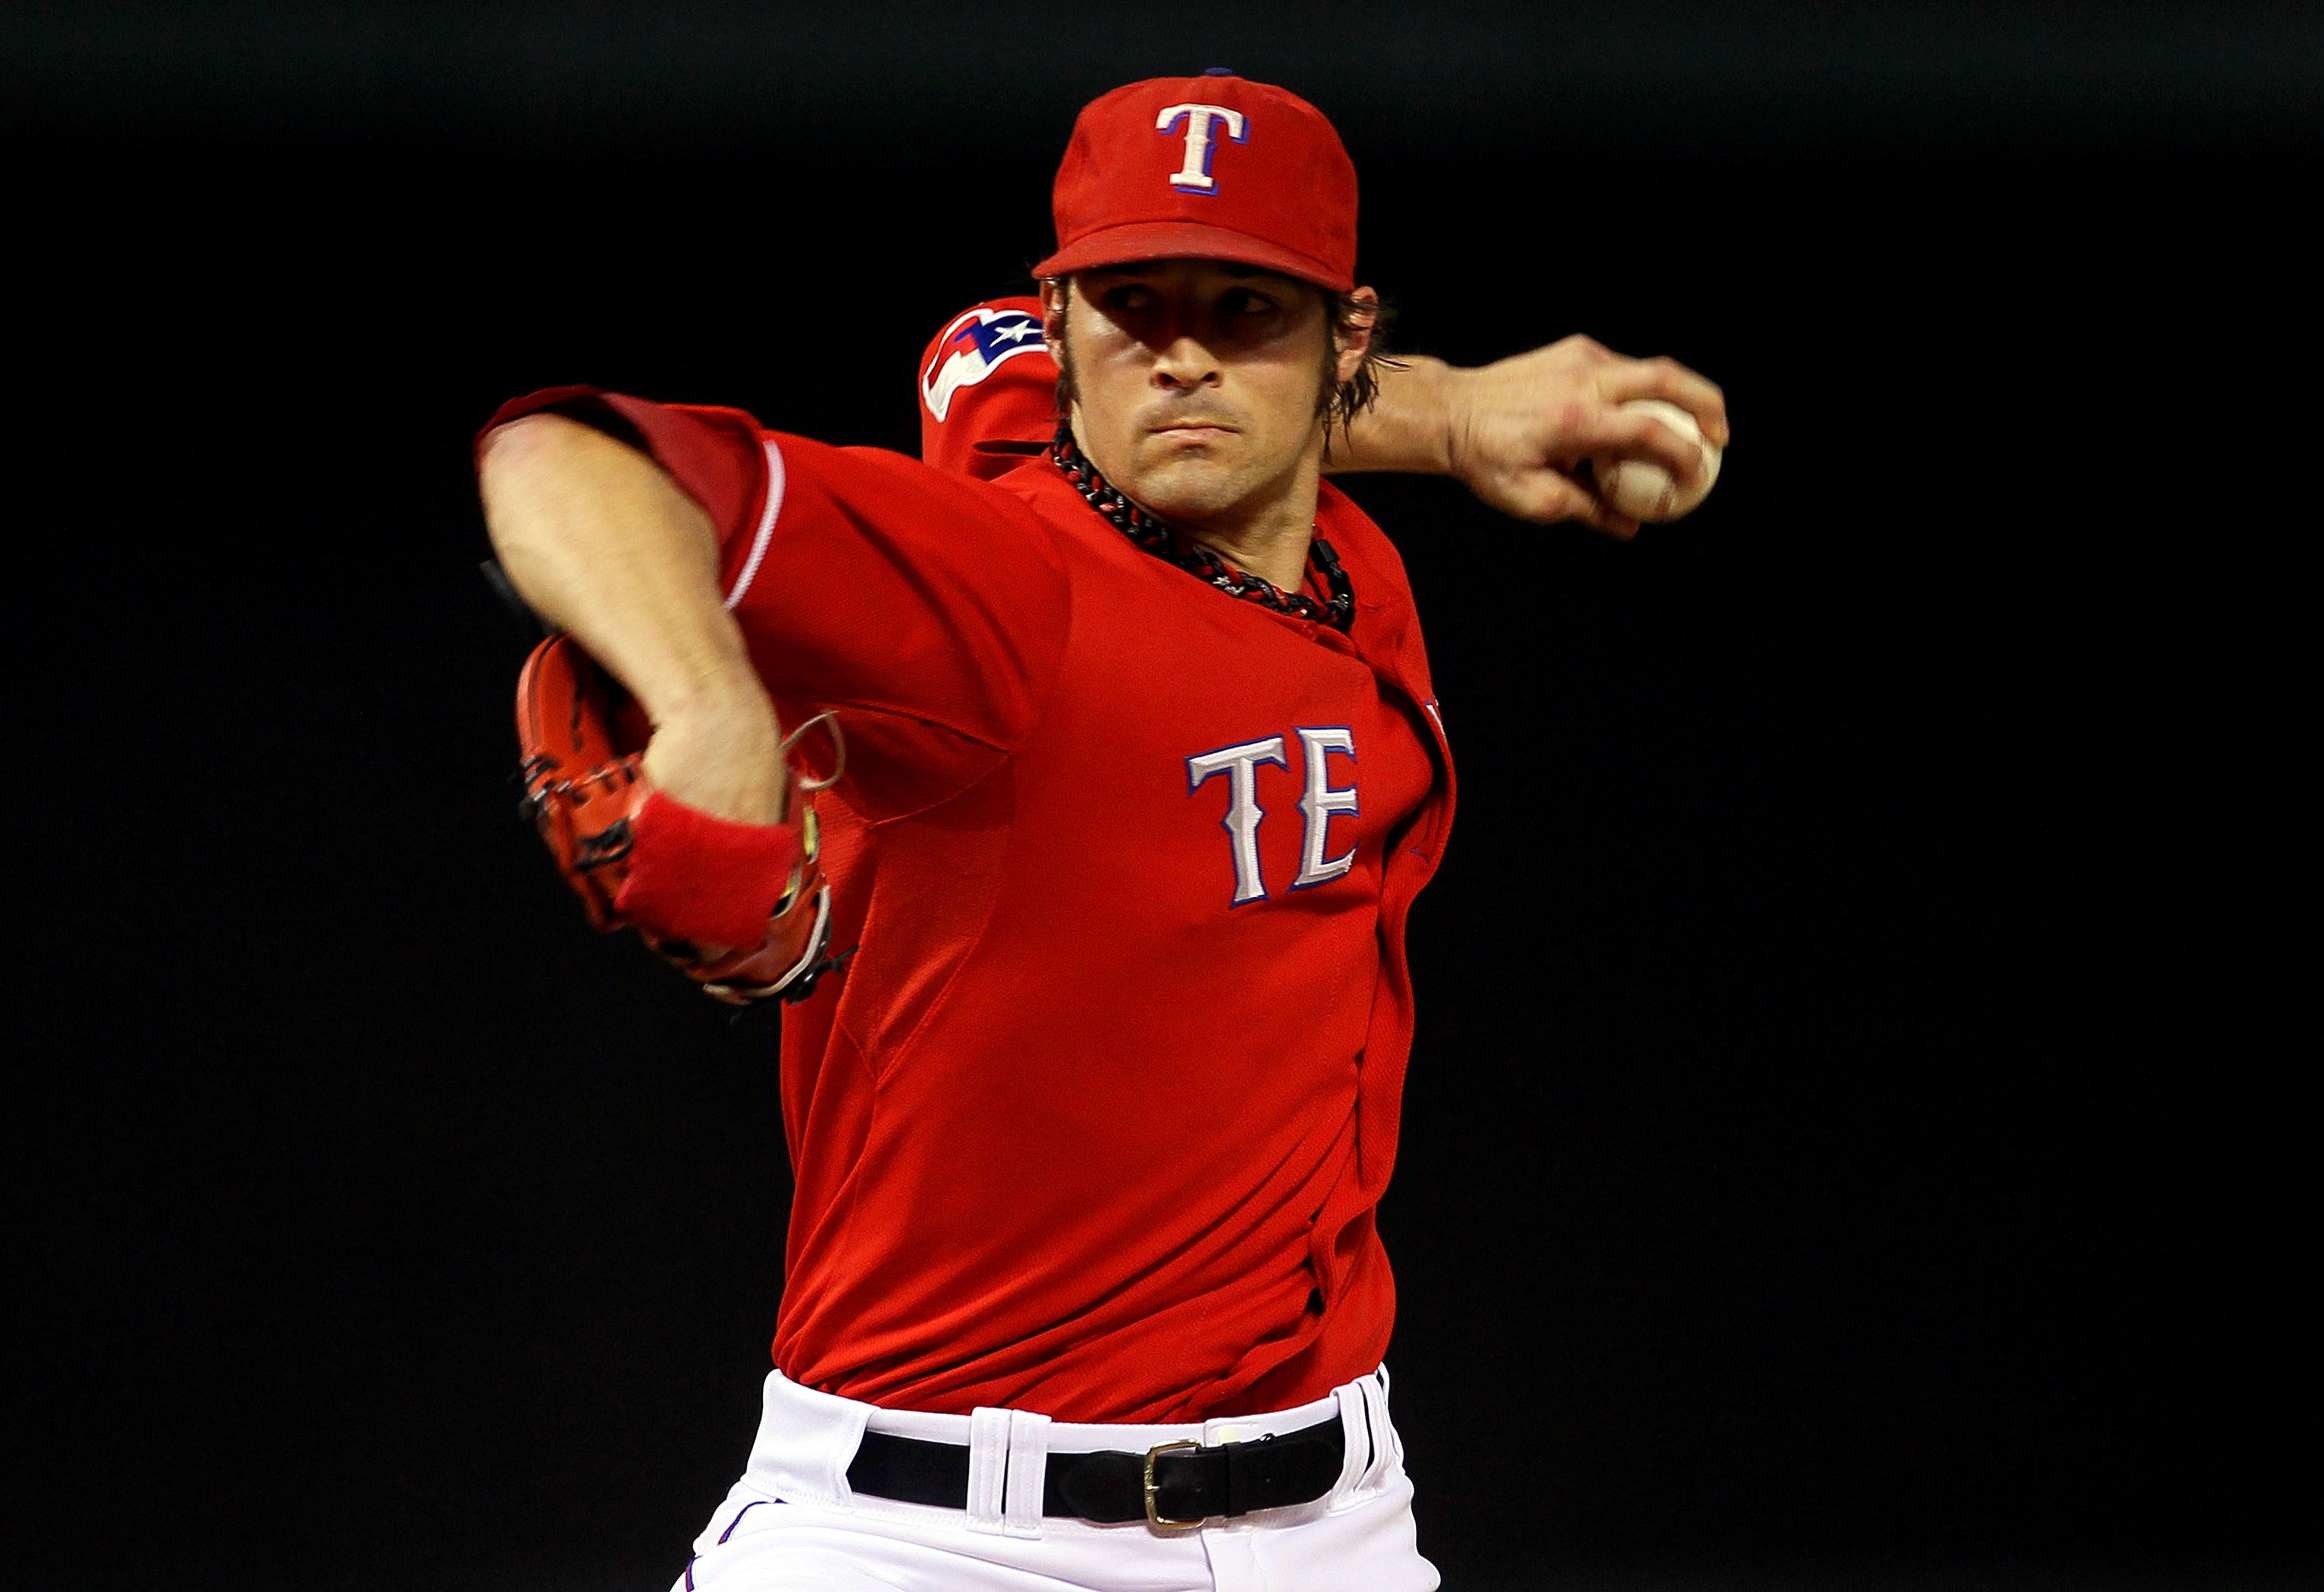 ARLINGTON, TX - OCTOBER 15: C.J. Wilson #36 of the Texas Rangers pitches against the New York Yankees in Game One of the ALCS during the 2010 MLB Playoffs at Rangers Ballpark in Arlington on October 15, 2010 in Arlington, Texas.  (Photo by Stephen Dunn/Ge